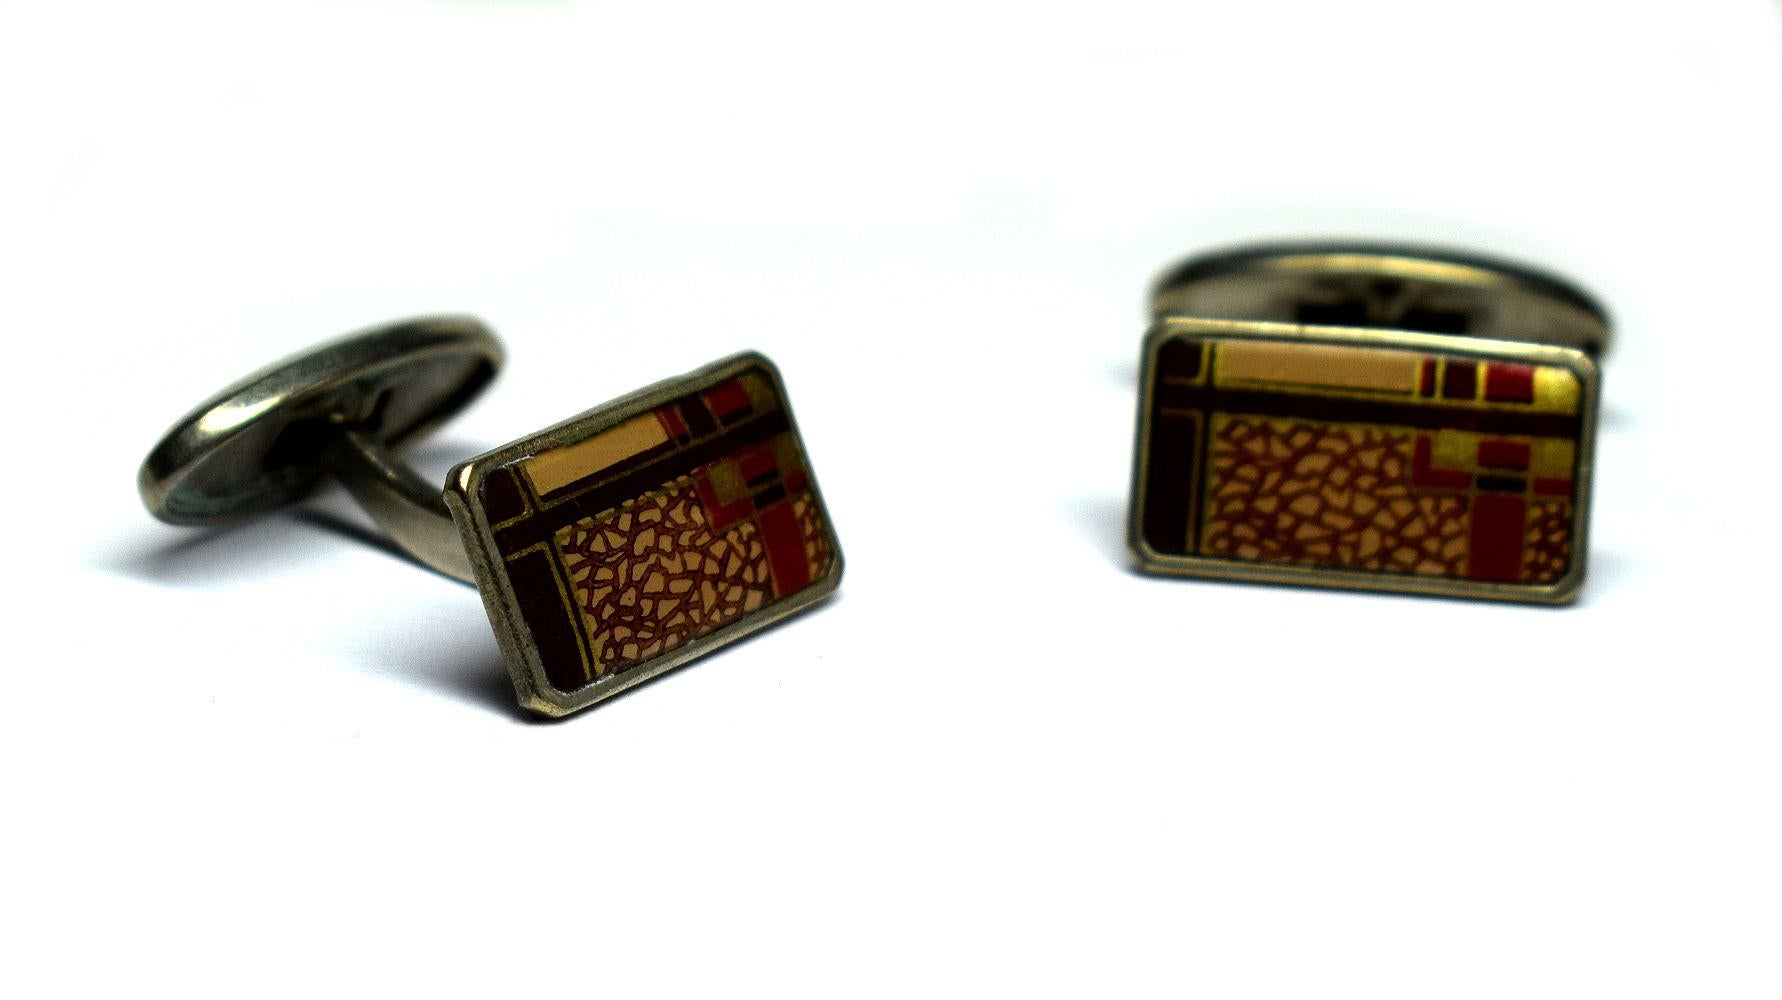 Fabulous pair of matching 1930s Art Deco men’s cufflinks with a great geometric pattern. Silver toned metal with tri-color enamel decoration. Condition is very good.